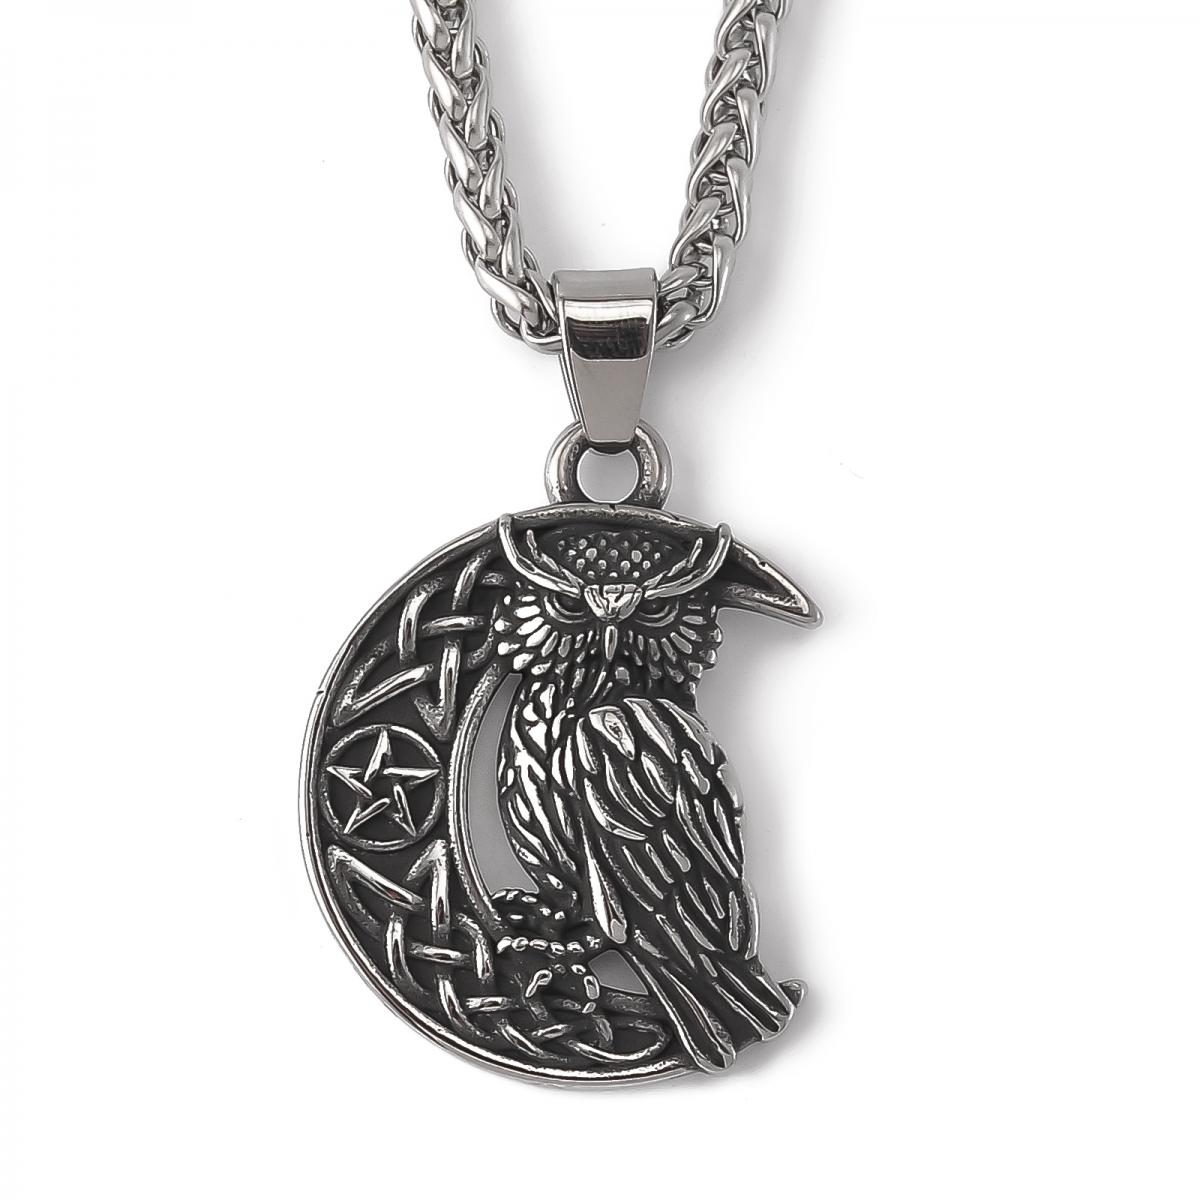 Owl Necklace US$3.5/PC-NORSECOLLECTION- Viking Jewelry,Viking Necklace,Viking Bracelet,Viking Rings,Viking Mugs,Viking Accessories,Viking Crafts